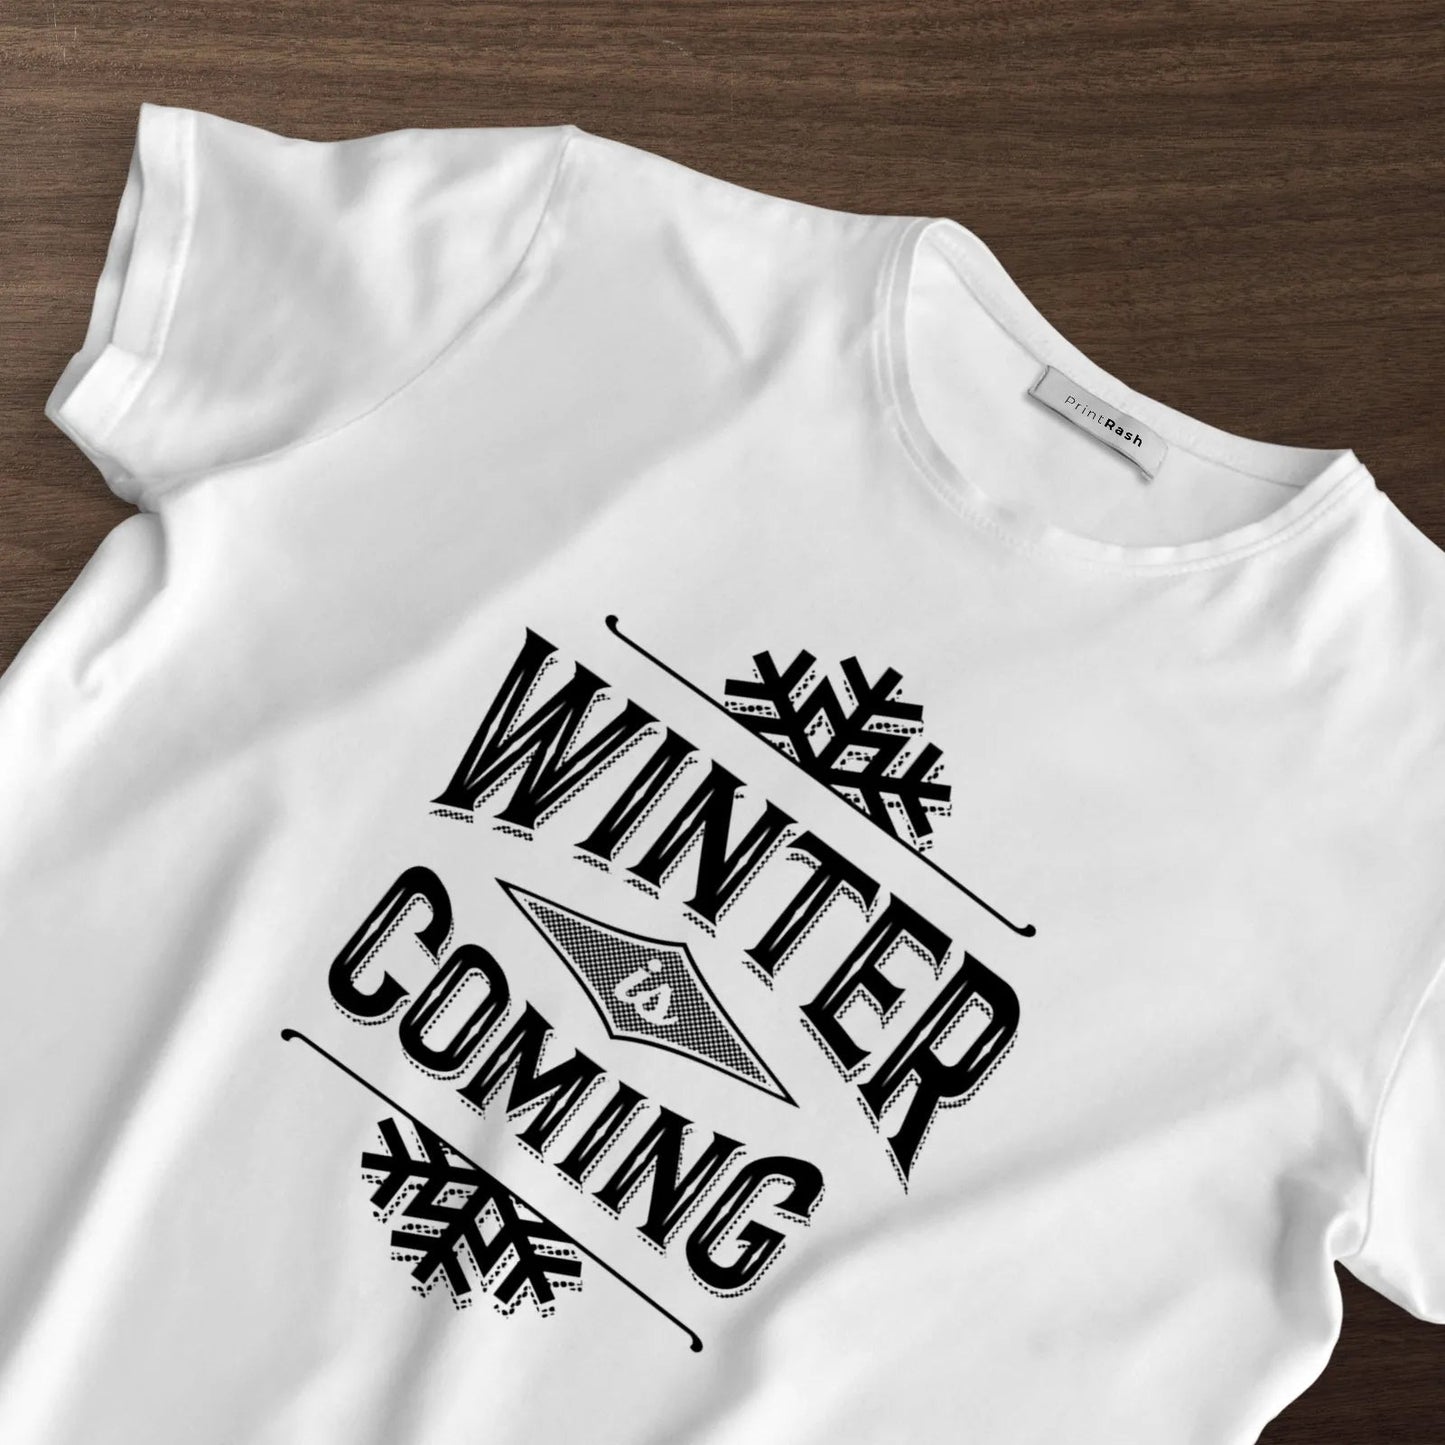 Winter is Coming Men's roscoe T-Shirt White Color Half Sleeve Round Neck Printed